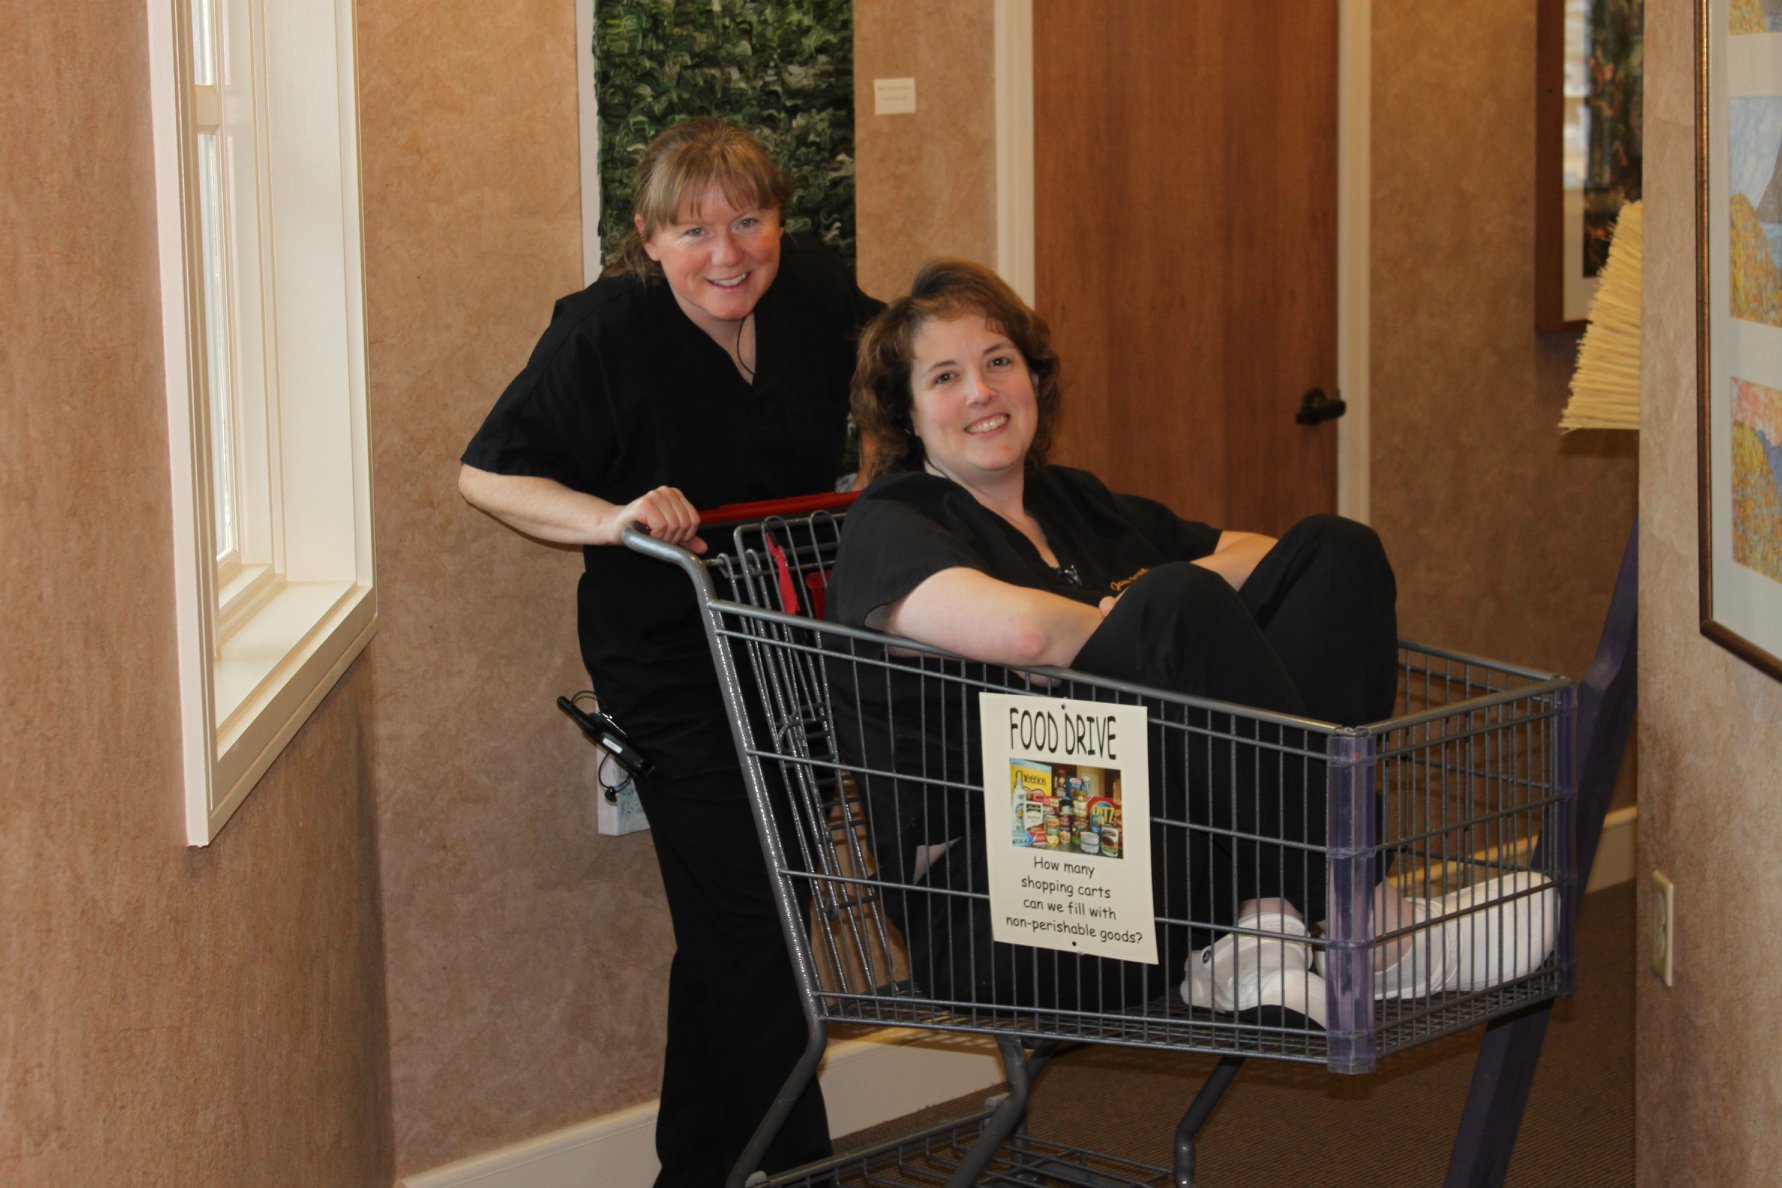 Kathryn pushing Janet in a shopping cart for a food drive for the local Food Pantry